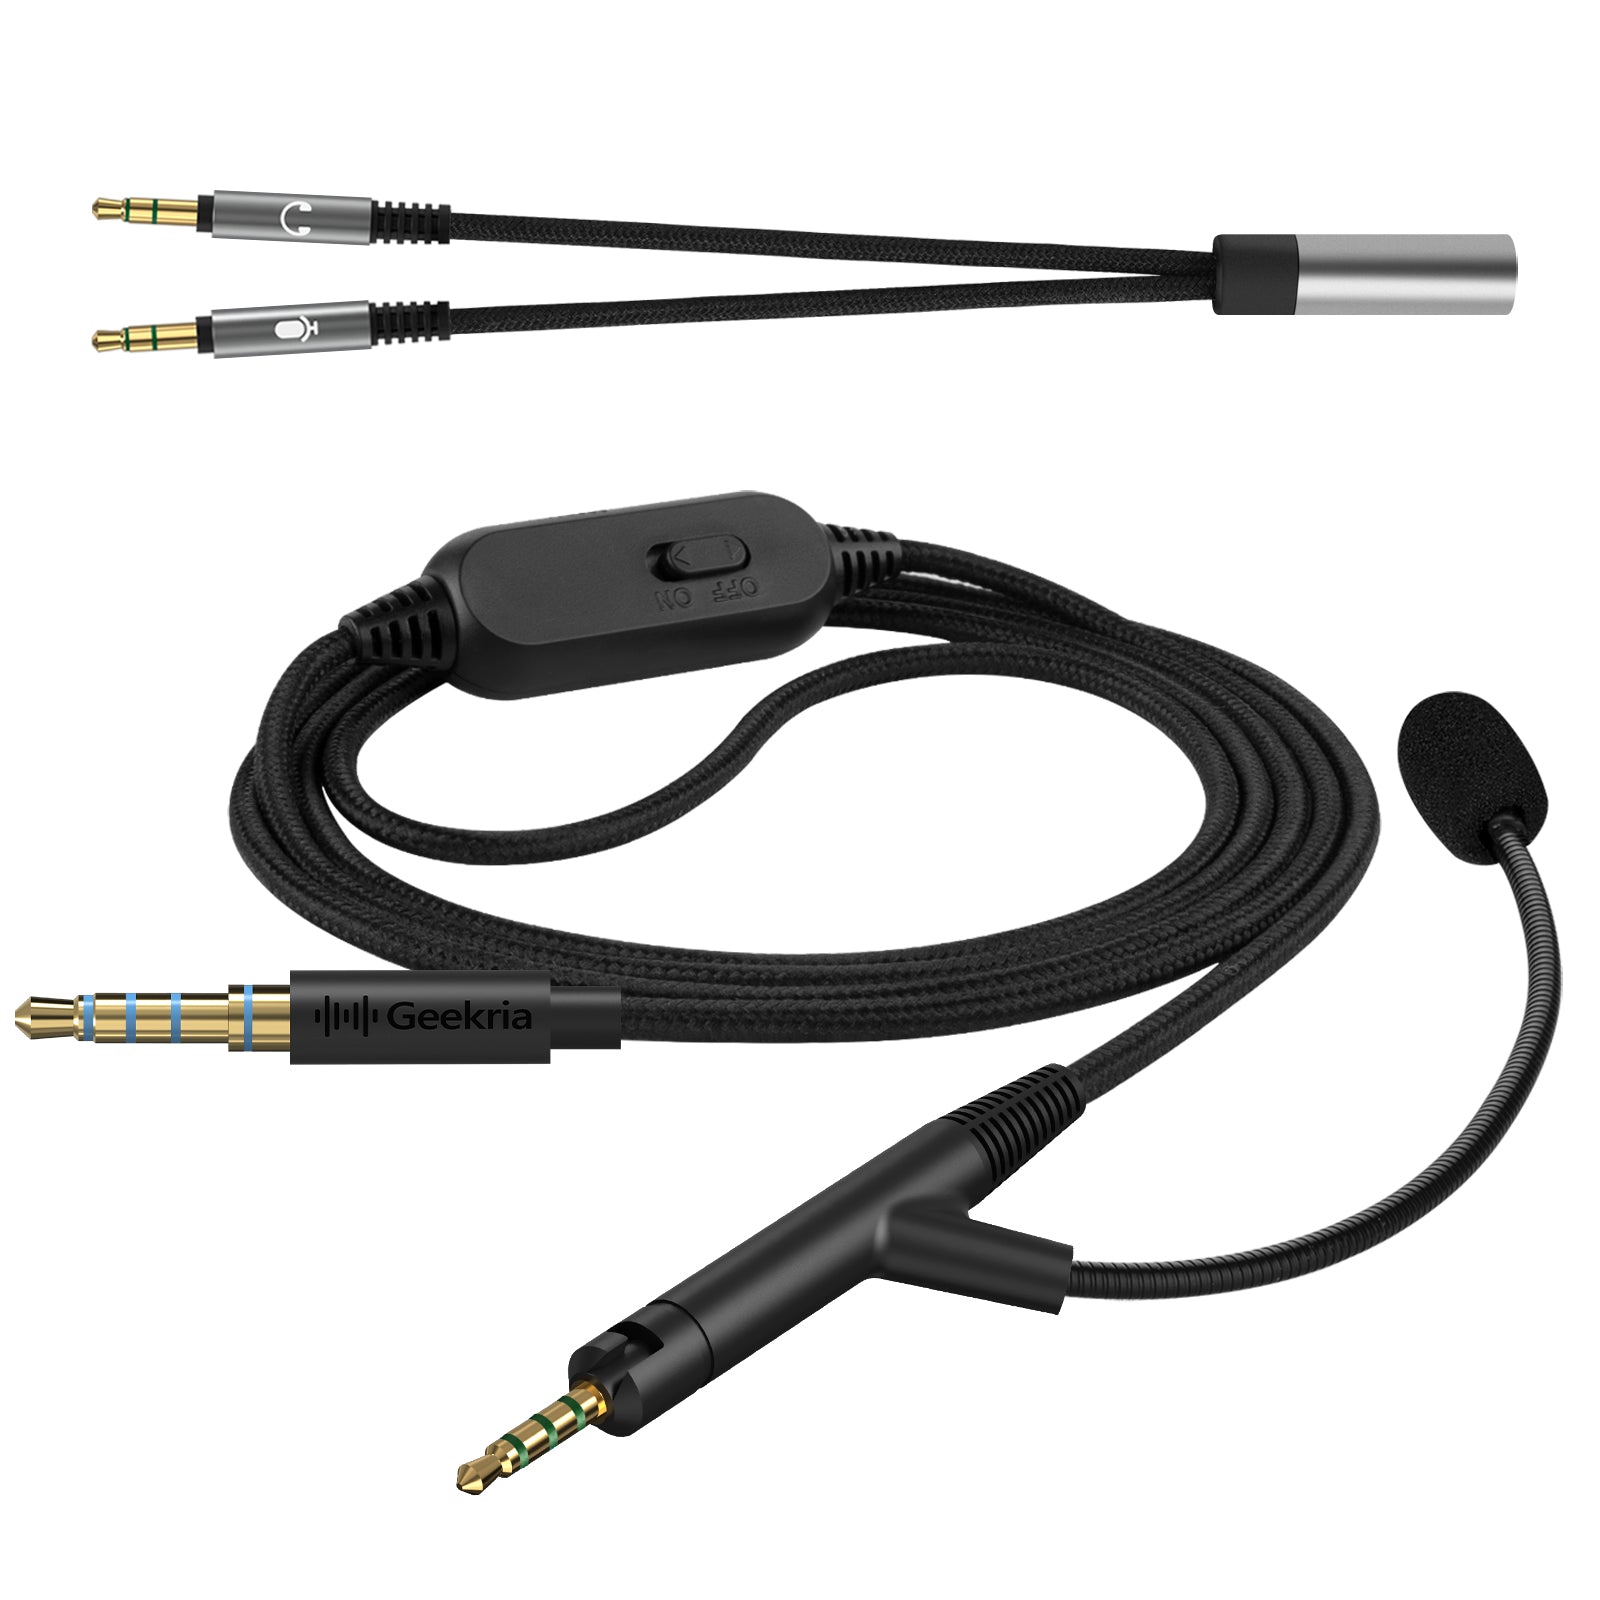 Geekria Boom Mic Headphones Cable Compatible with Sennheiser HD 599SE